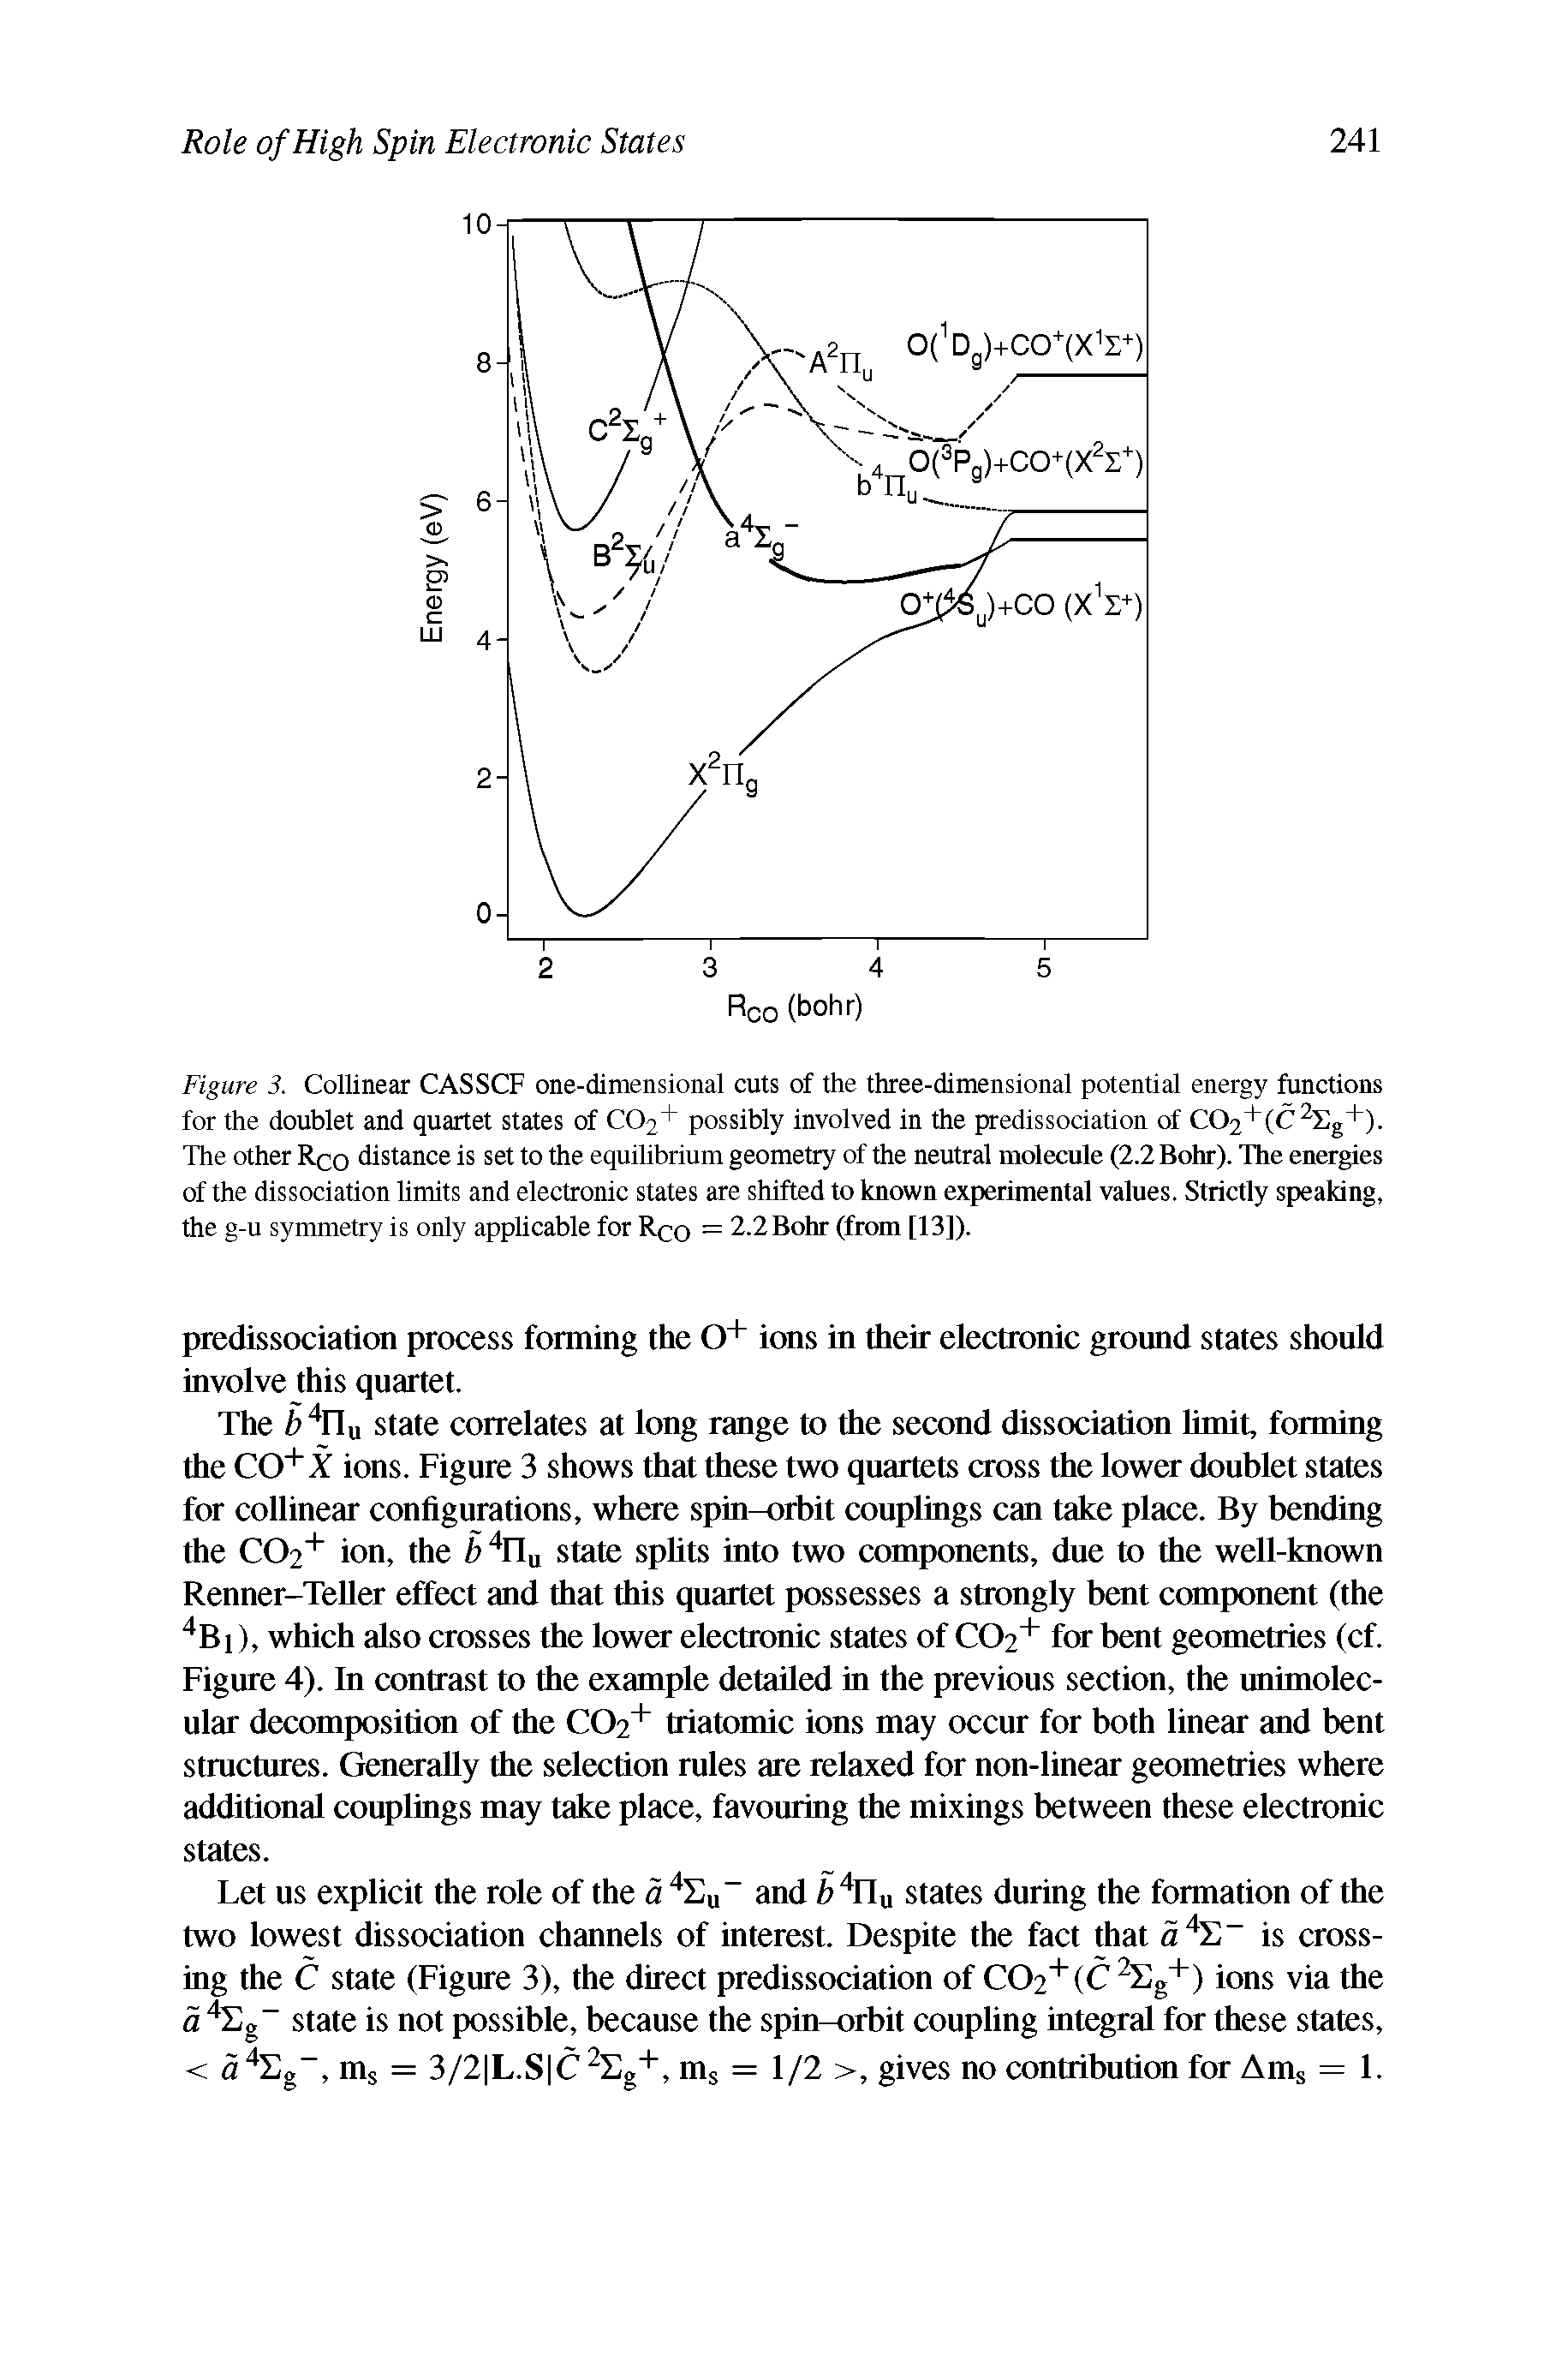 Figure 3. Collinear CASSCF one-dimensional cuts of the three-dimensional potential energy functions for the doublet and quartet states of CC>2+ possibly involved in the predissociation of CO2+(C2 g+). The other Rco distance is set to the equilibrium geometry of the neutral molecule (2.2 Bohr). The energies of the dissociation limits and electronic states are shifted to known experimental values. Strictly speaking, the g-u symmetry is only applicable for Rco = 2.2 Bohr (from [13]).